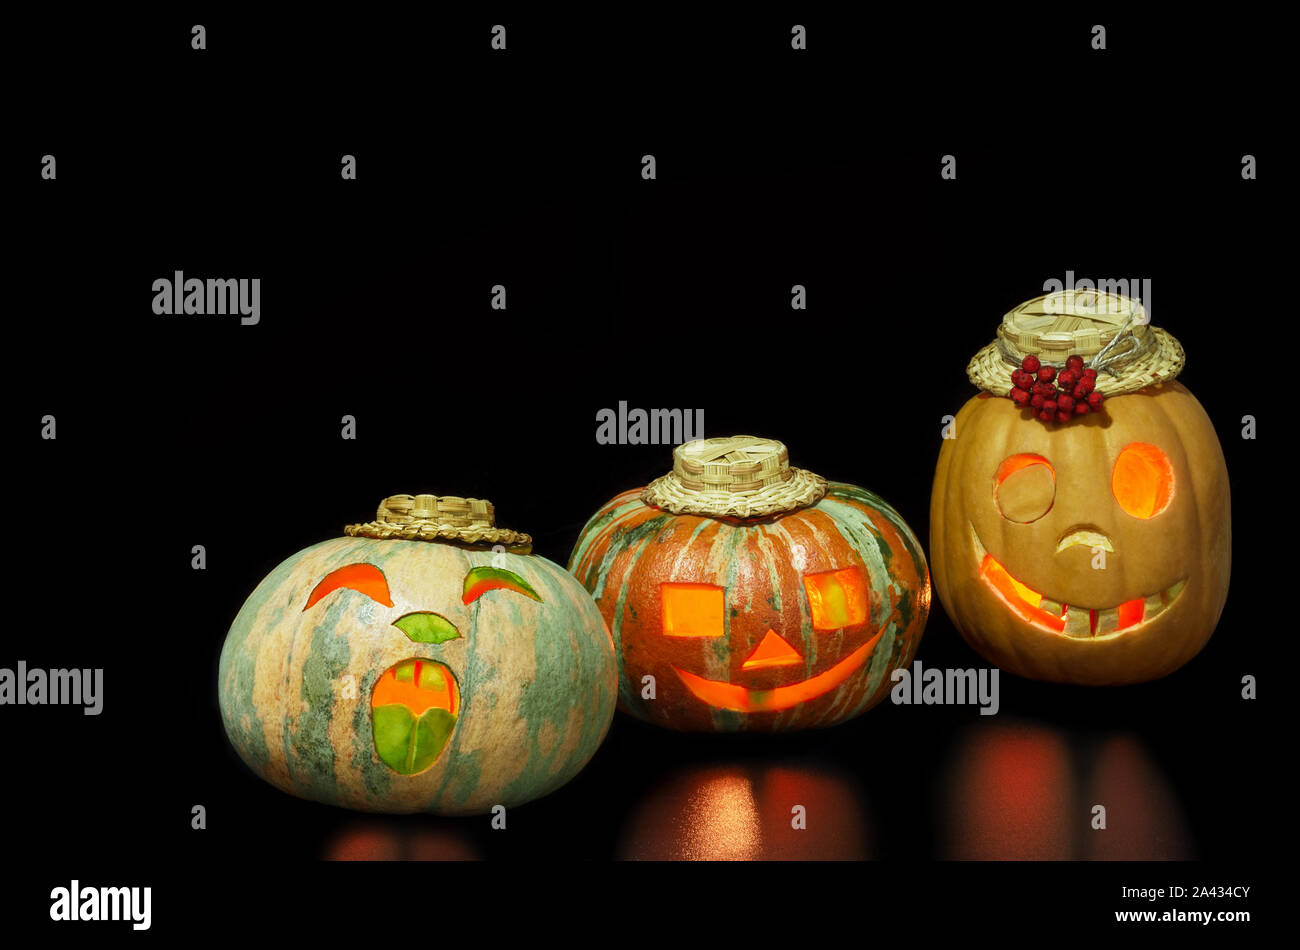 Halloween pumpkins funny and horrible on a black background Stock Photo